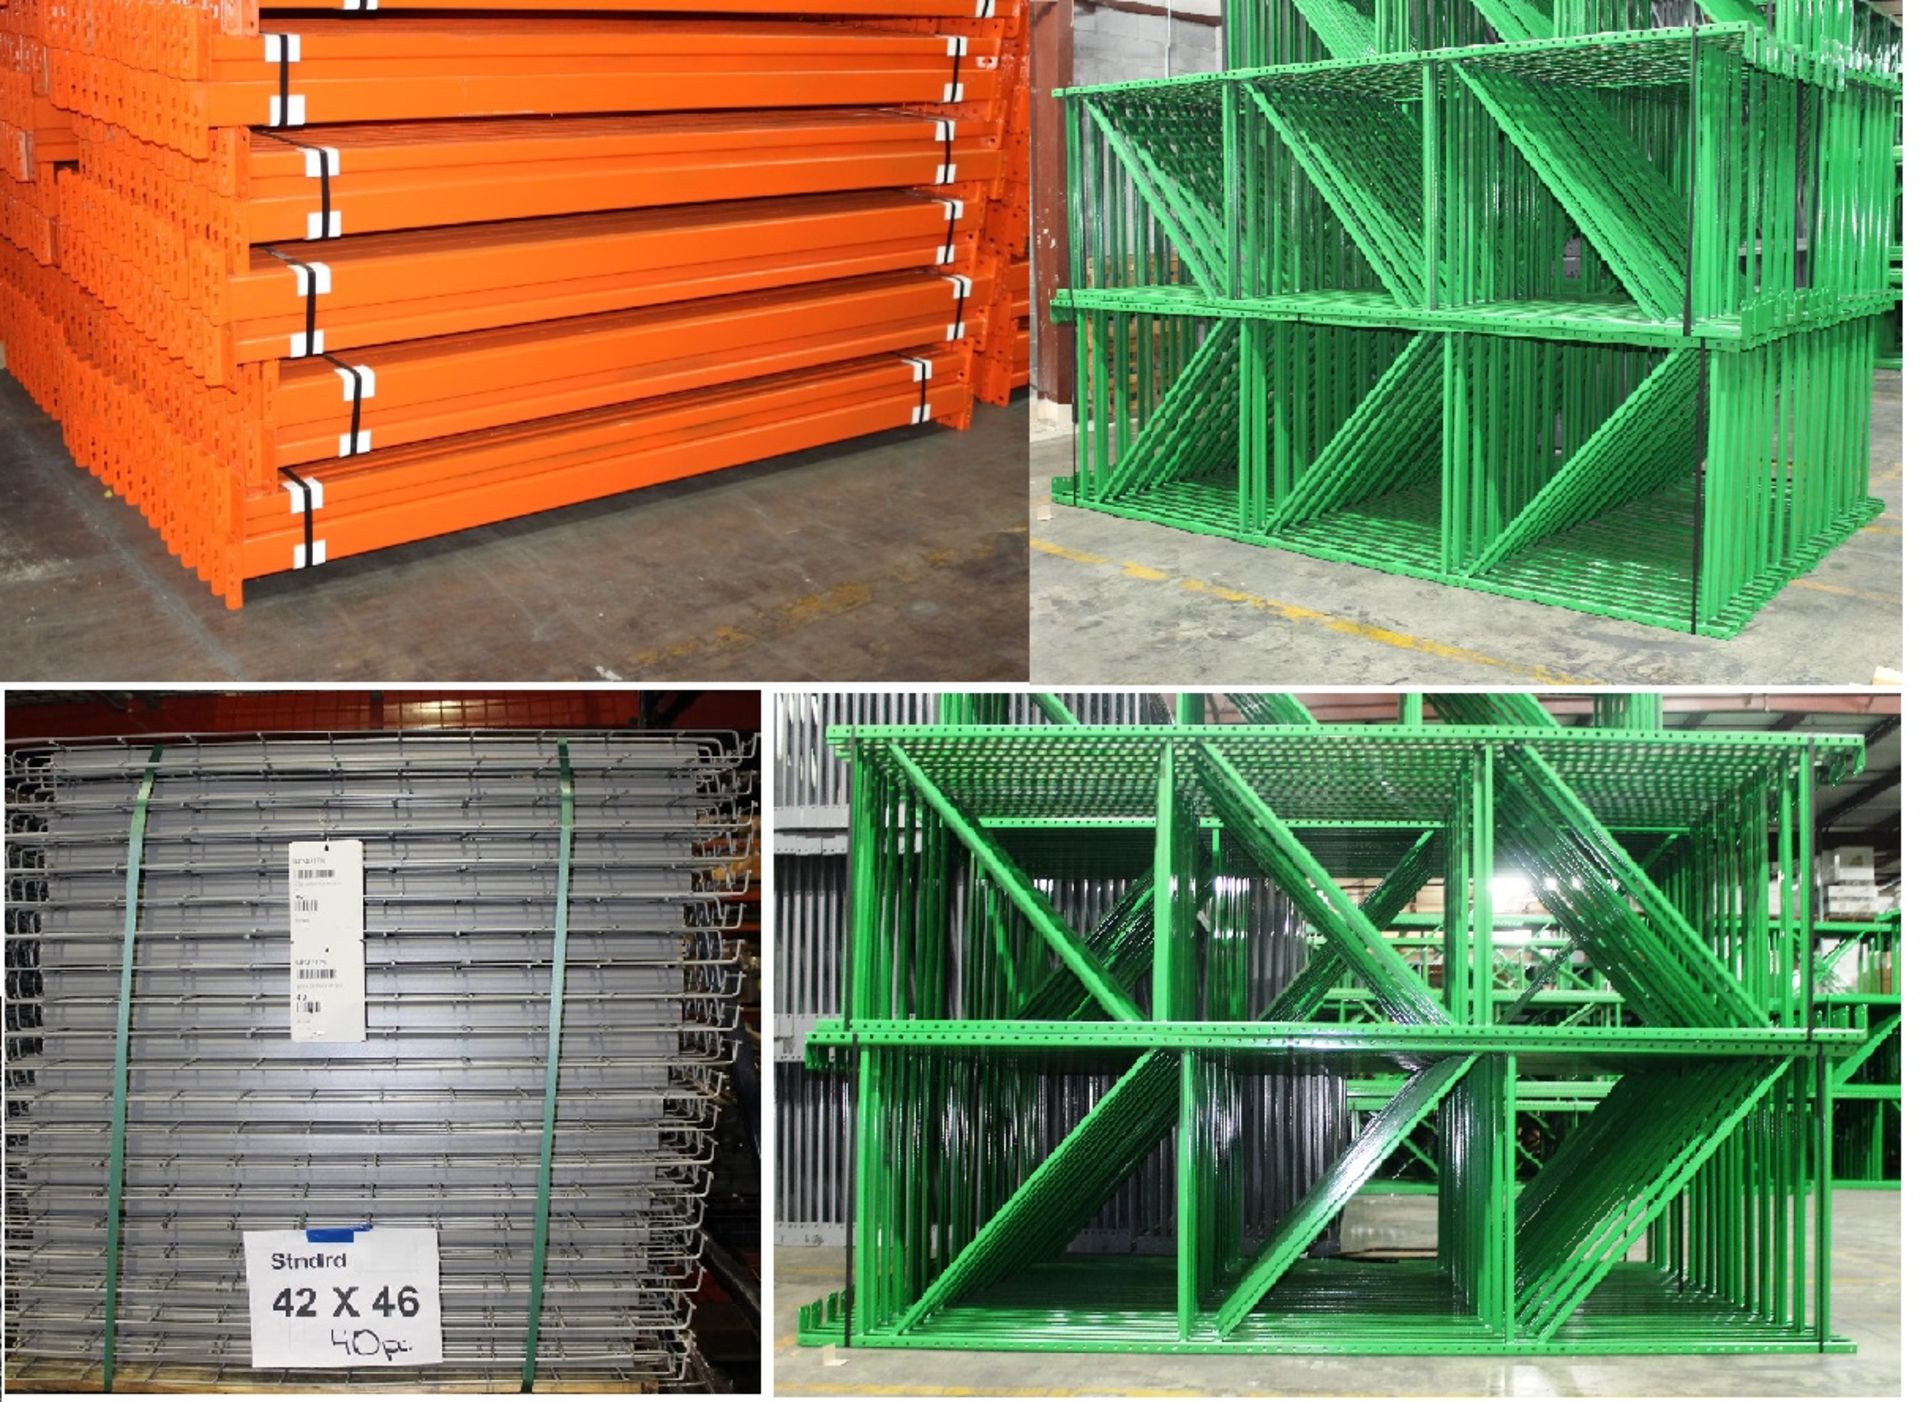 LIKE NEW TEAR DROP STYLE PALLET RACK WITH WIRE DECKING. SIZE: 144"H X 96"L X 42"D, FULL TRUCK LOAD - Image 3 of 5